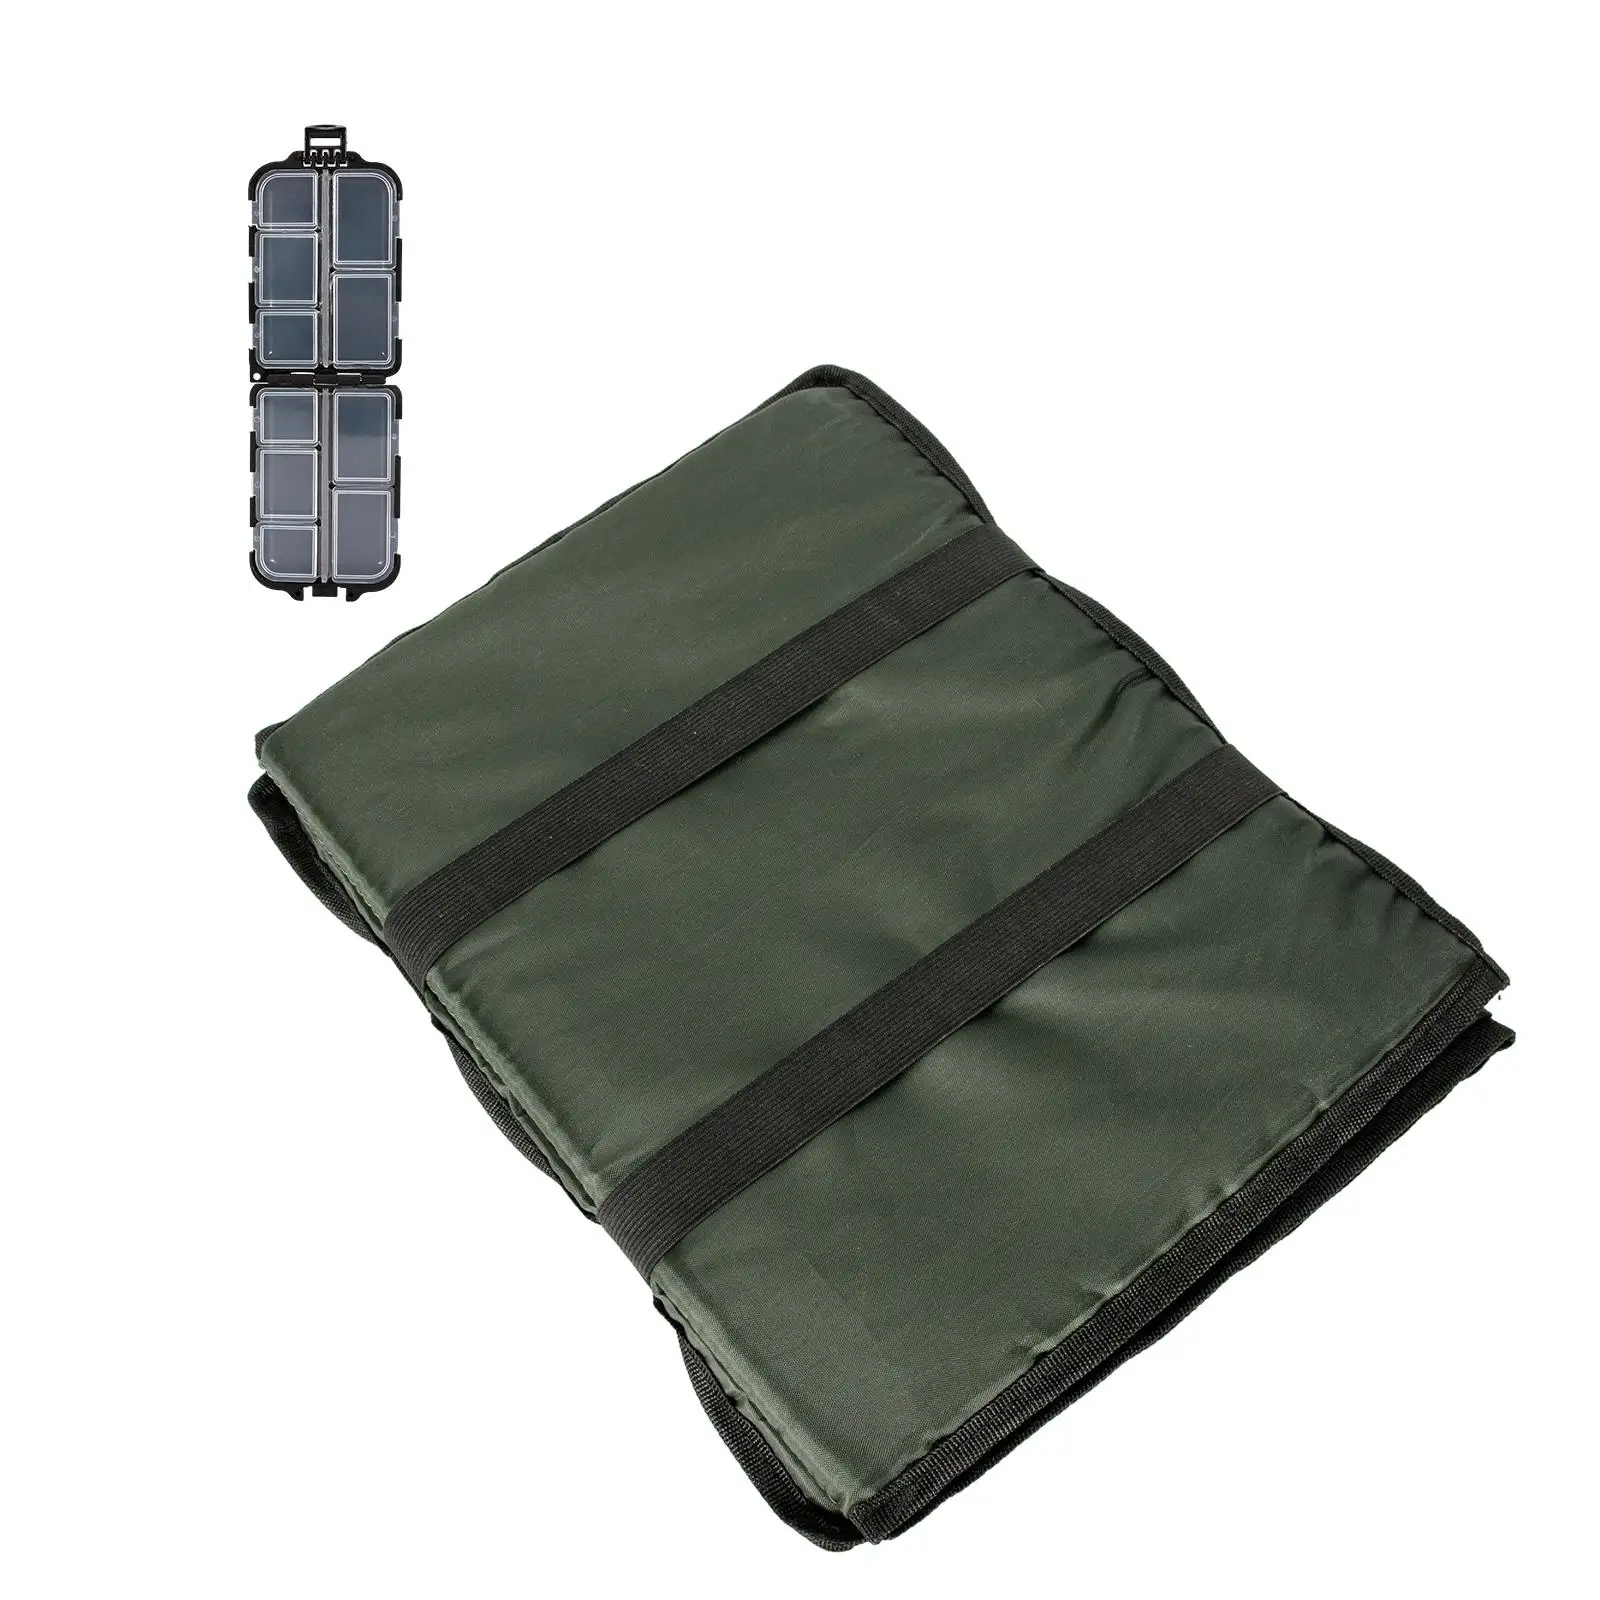 Carp Fishing Unhooking Mat with Small Lure Box Accessory Rolls up for Convenient Storage